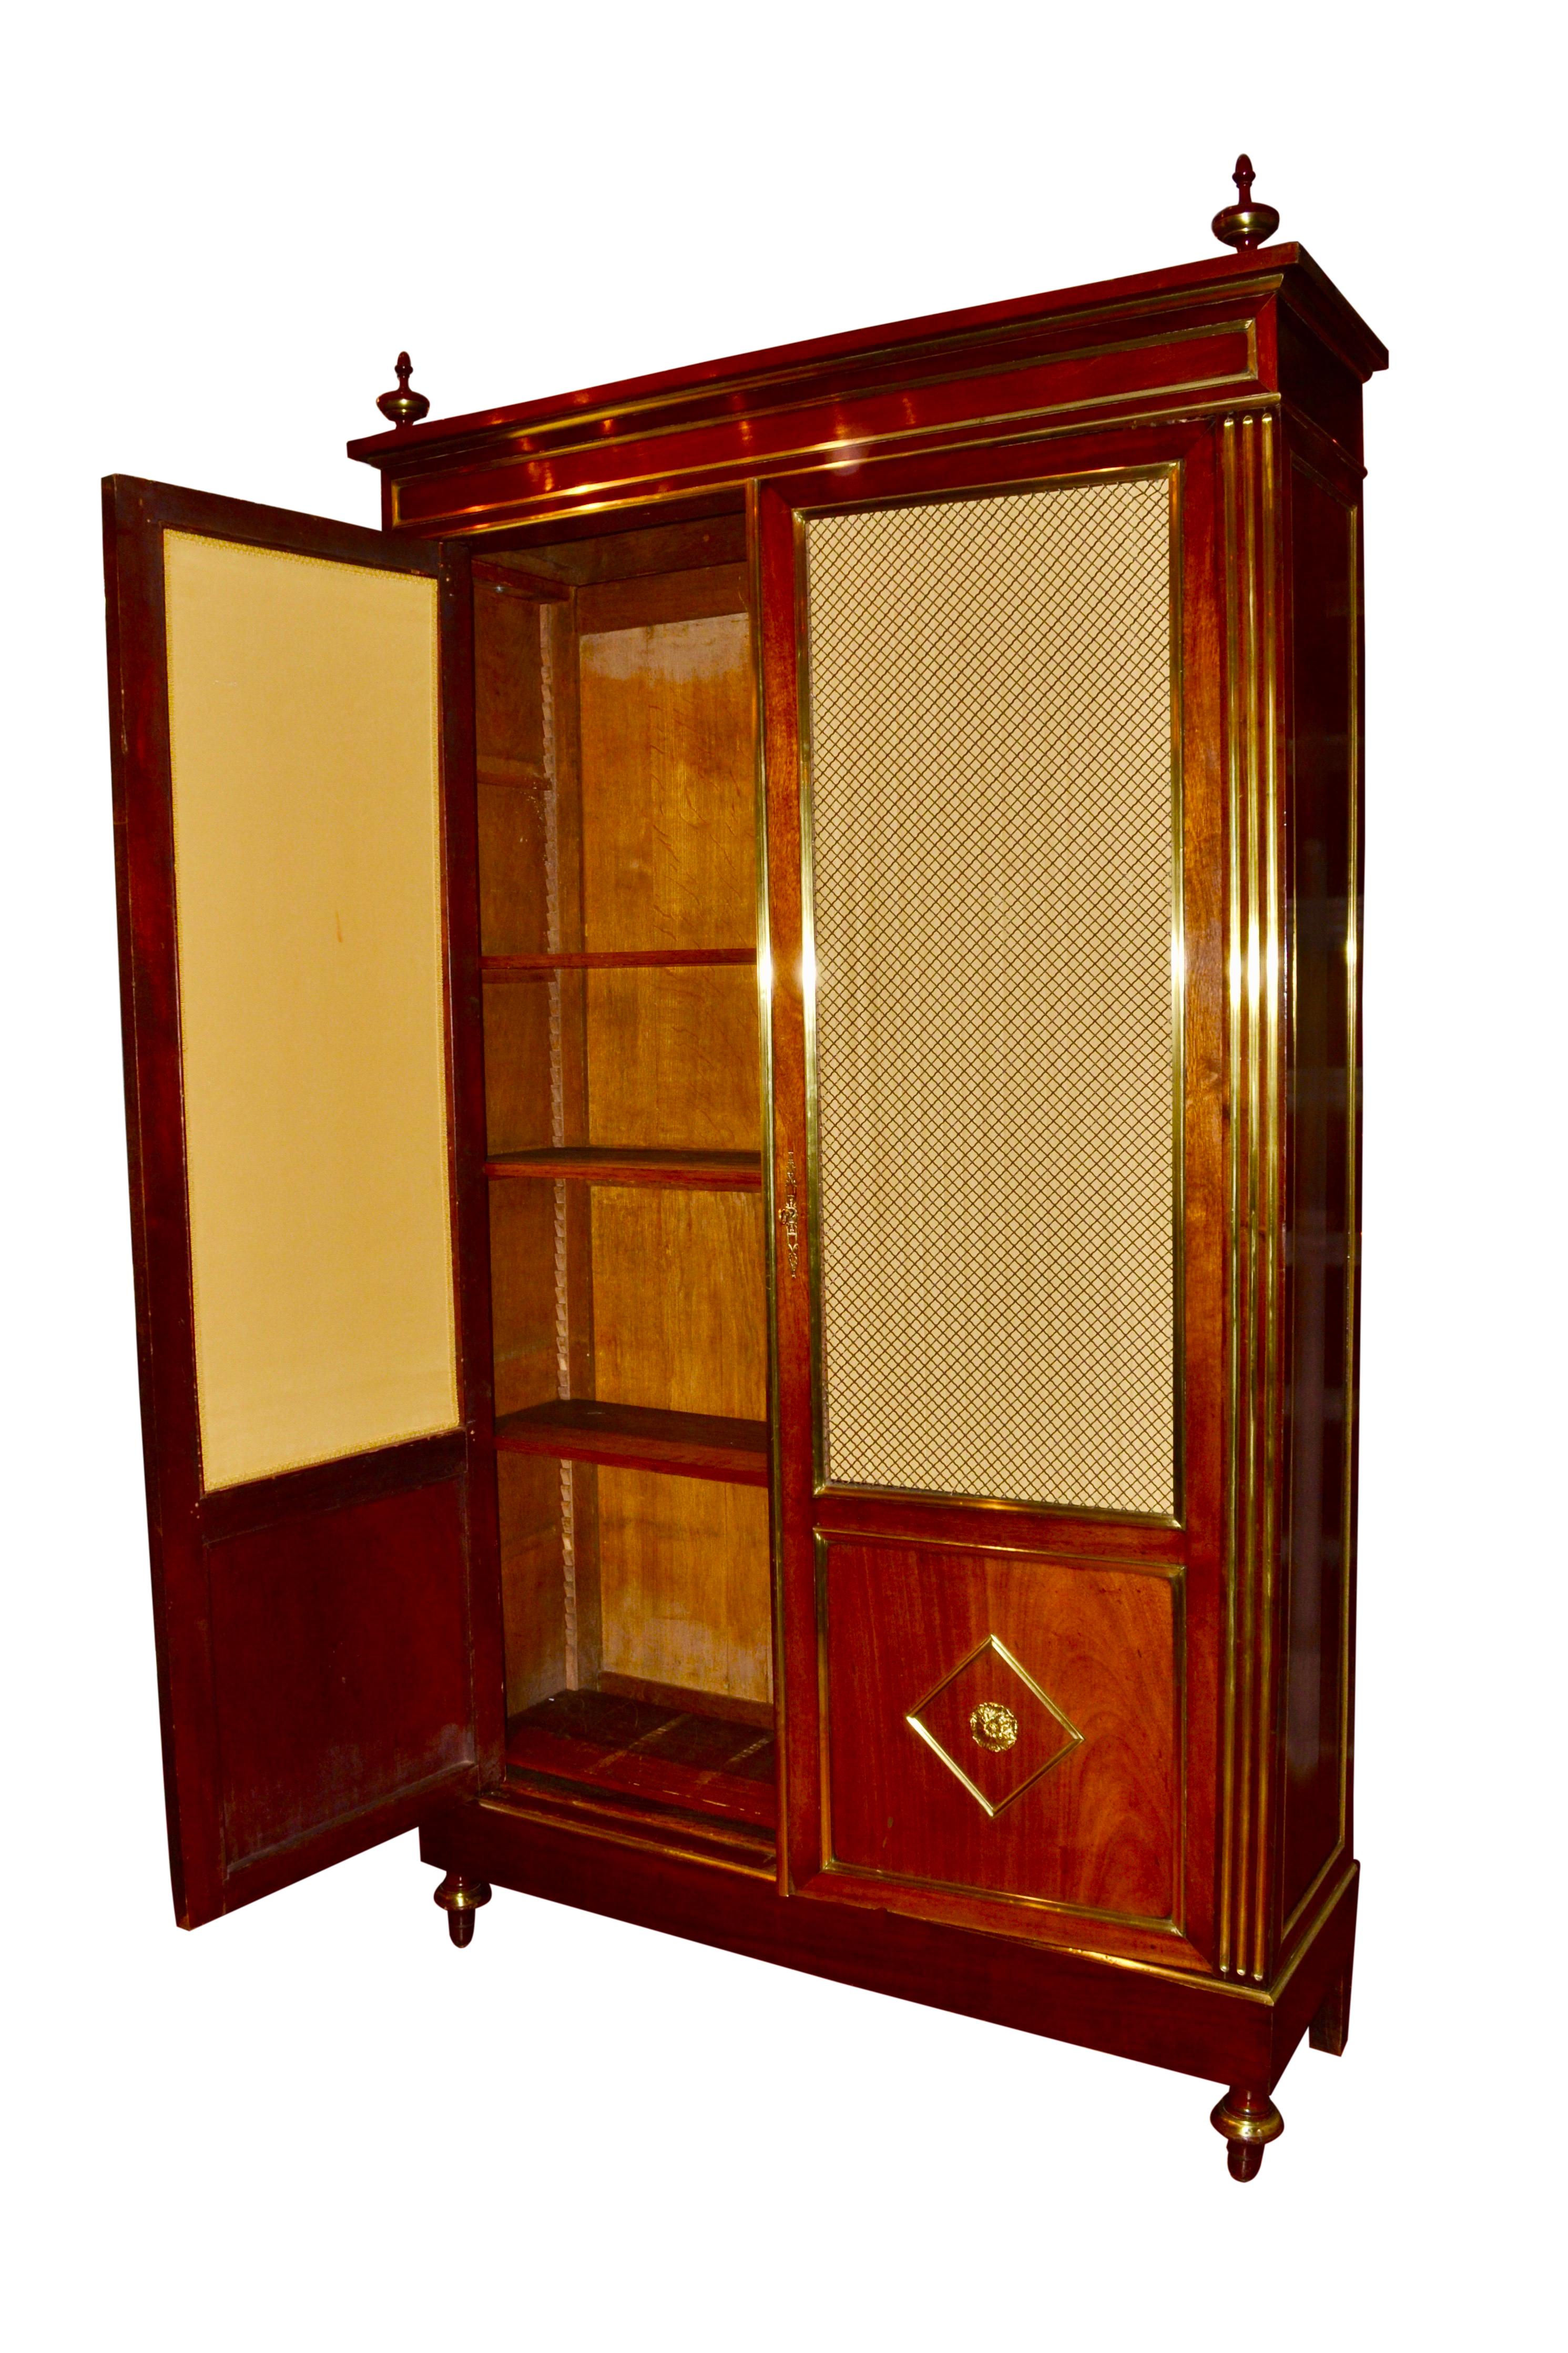 An elegant Louis XVI style bookcase/display case, the mahogany case richly inlaid with gilded brass fillets to the two front doors and both sides, Each door has a three quarter panel of open brass grill work over the lower quarter panel centered